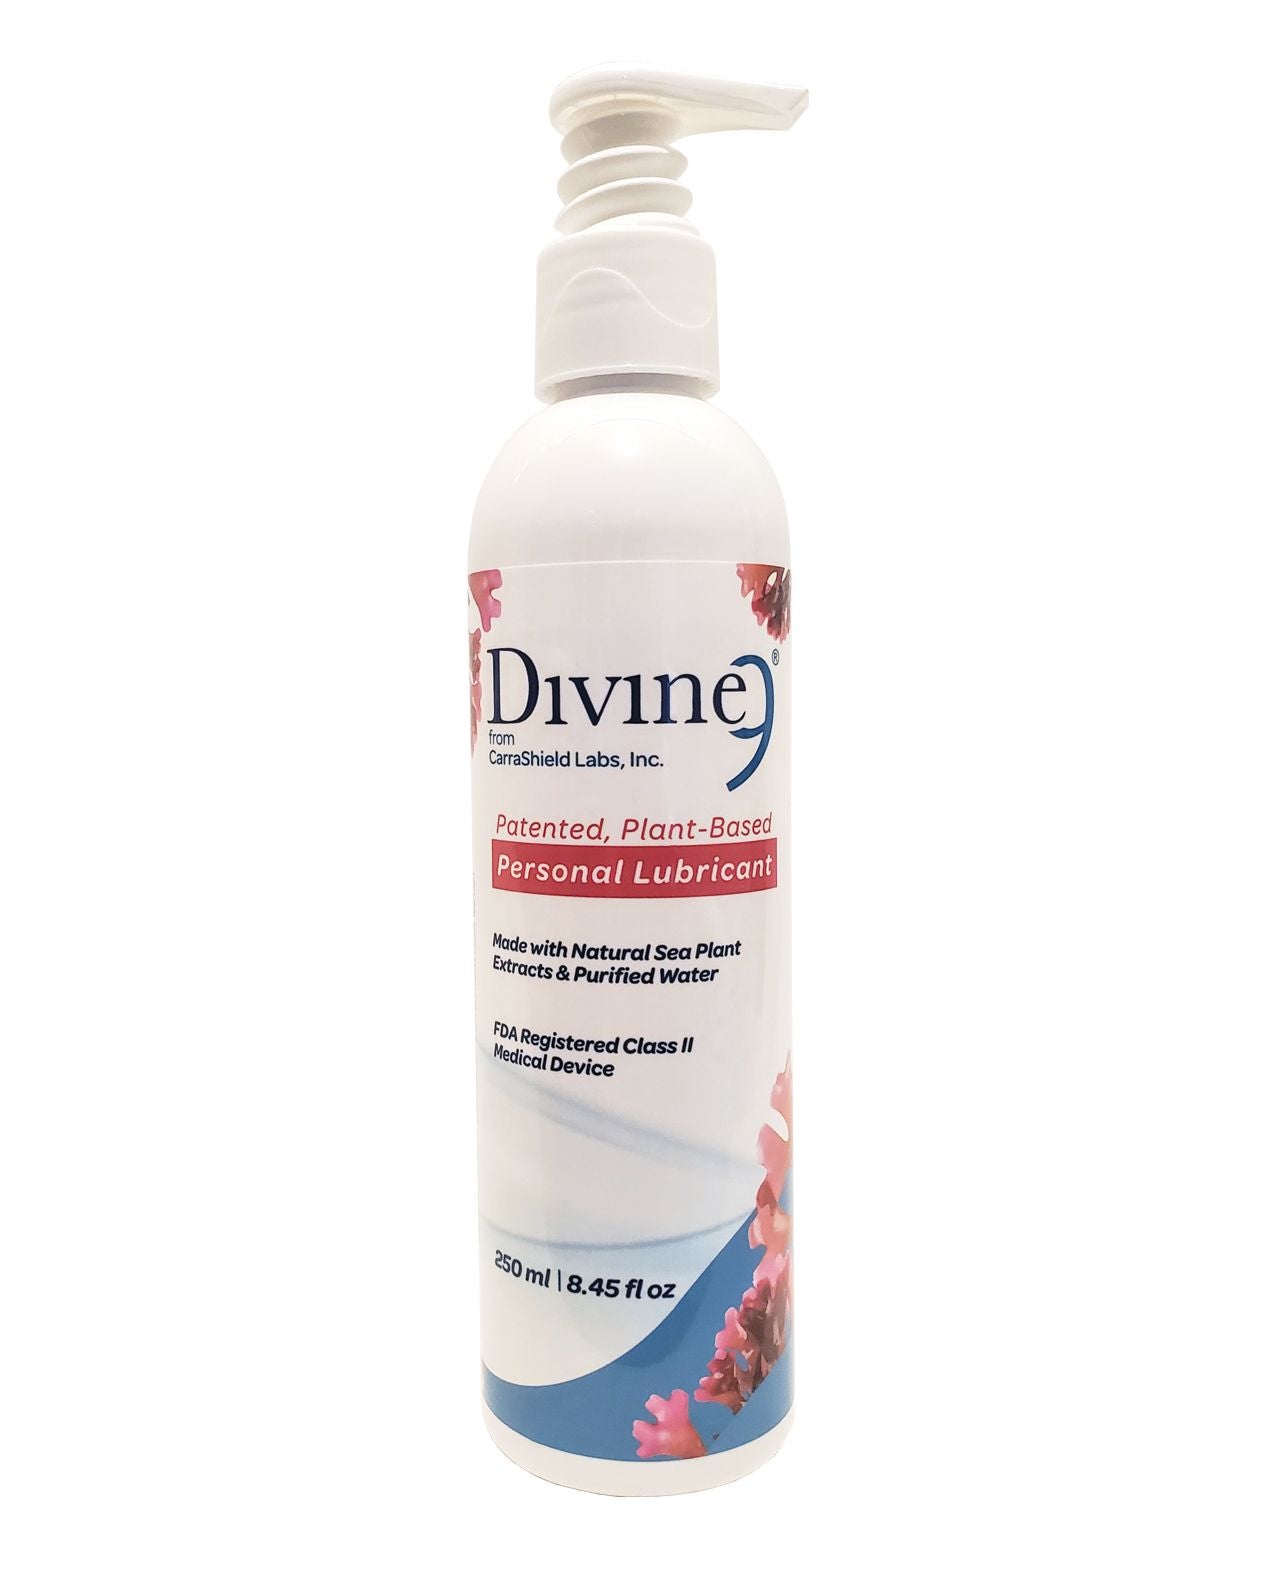 Divine 9 Lubricant by CarraShield Labs